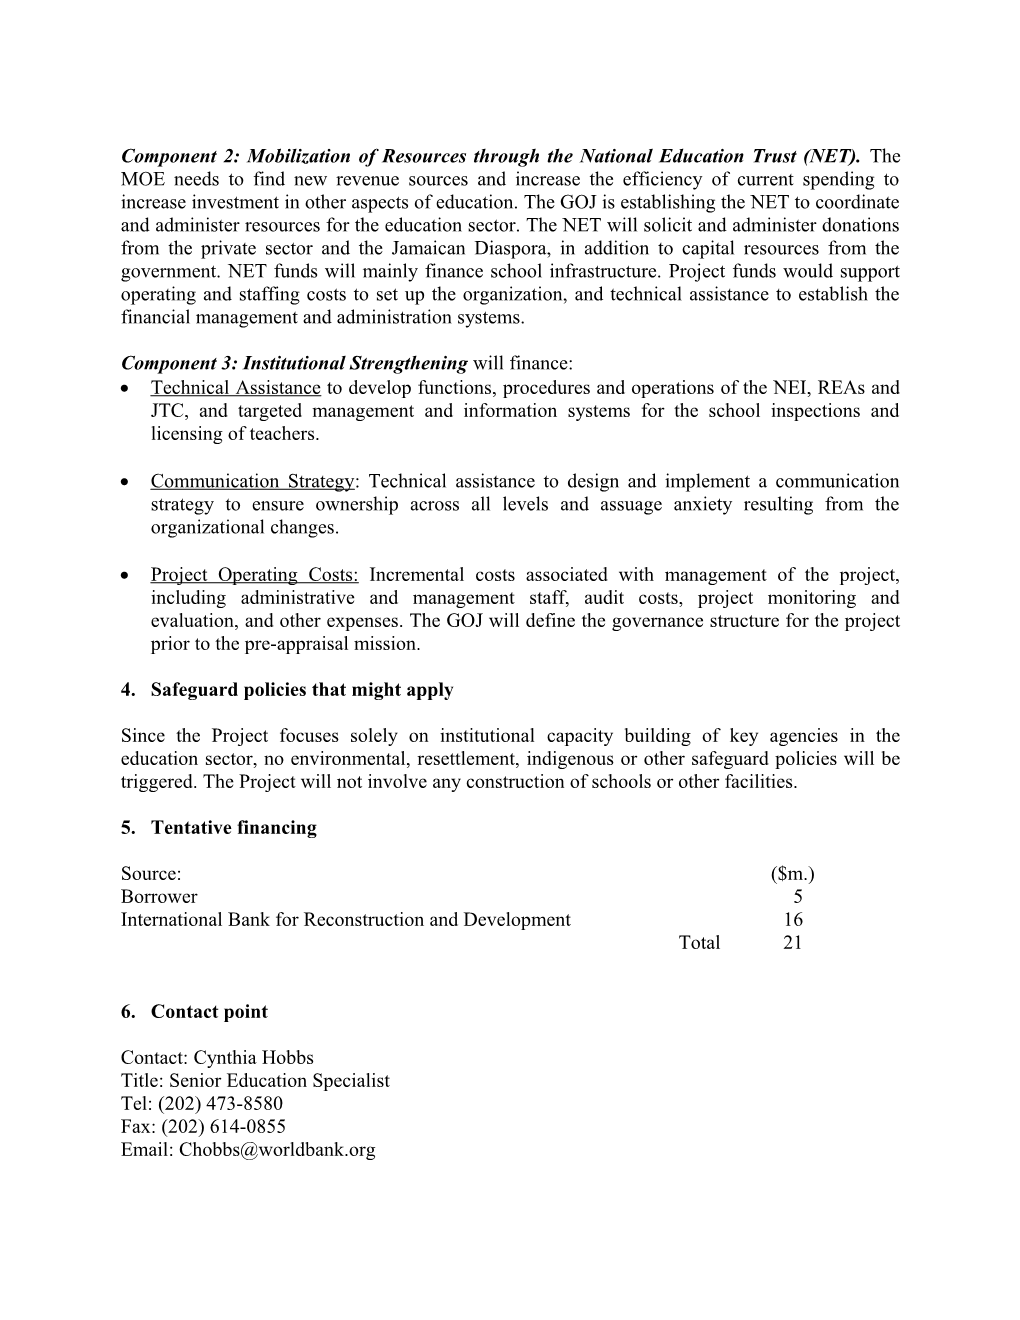 Project Information Document (Pid) s15